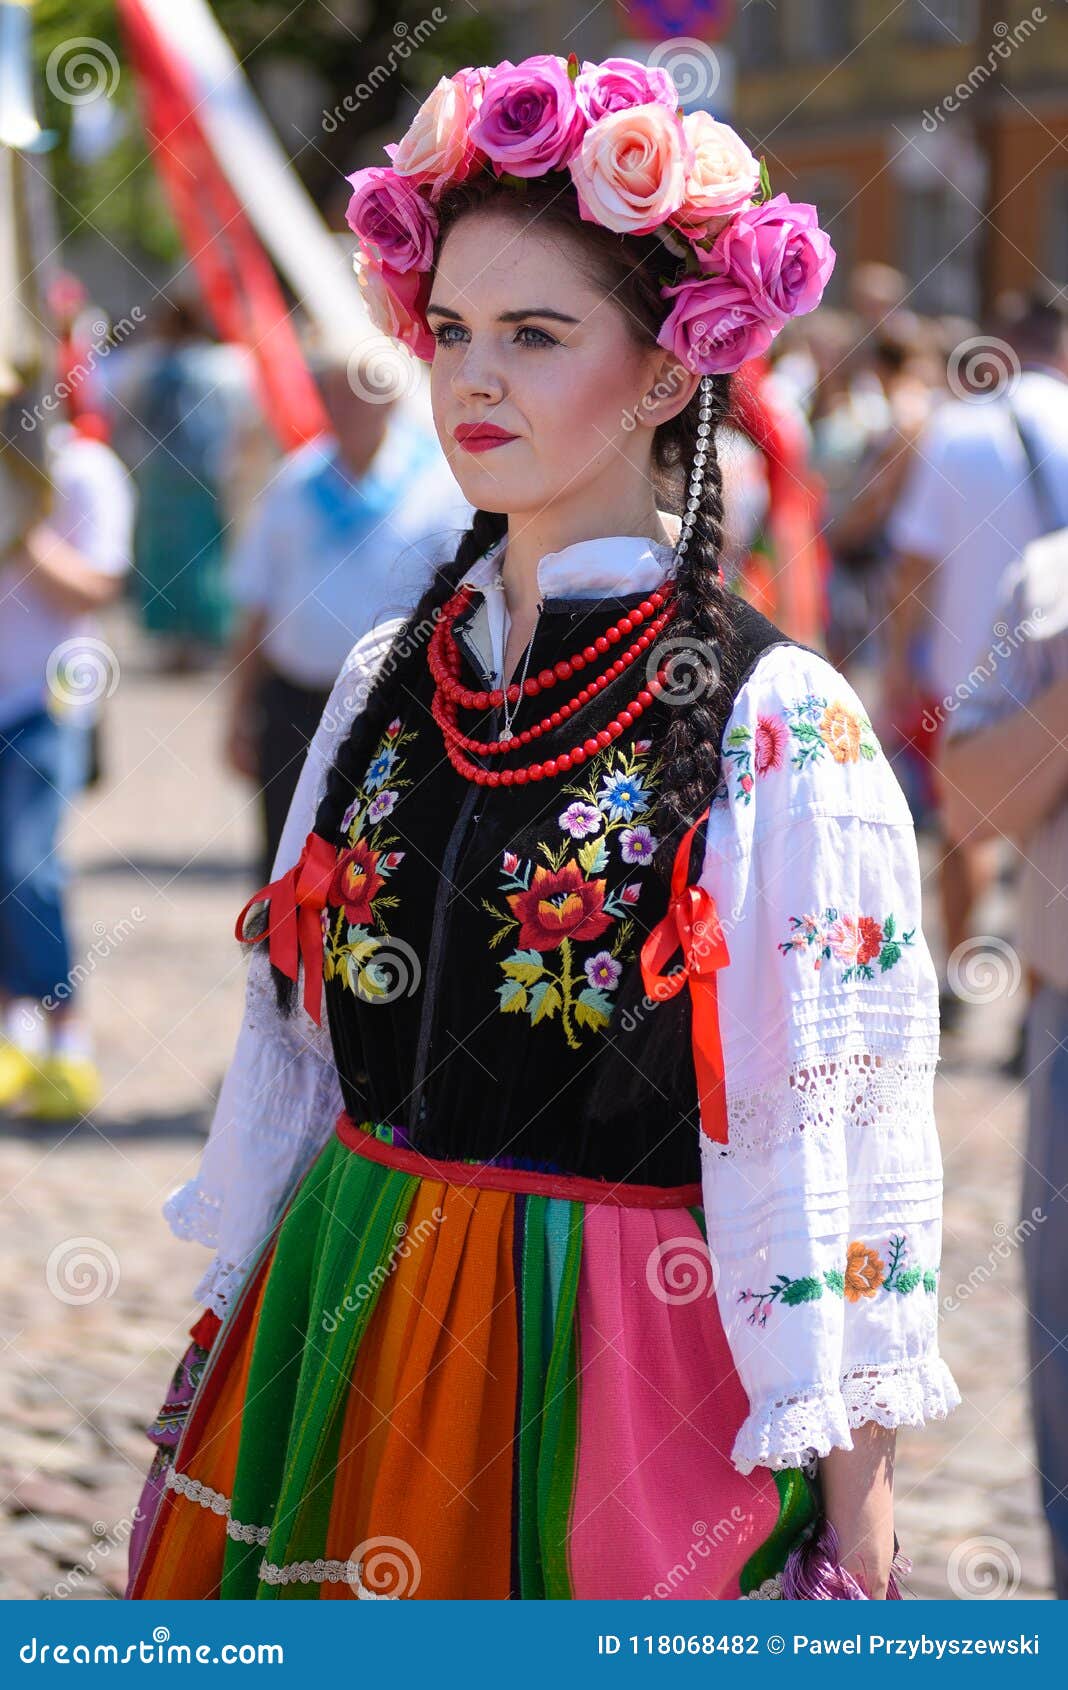 Lowicz / Poland - May 31.2018: Portrait of a Woman Dressed in a ...